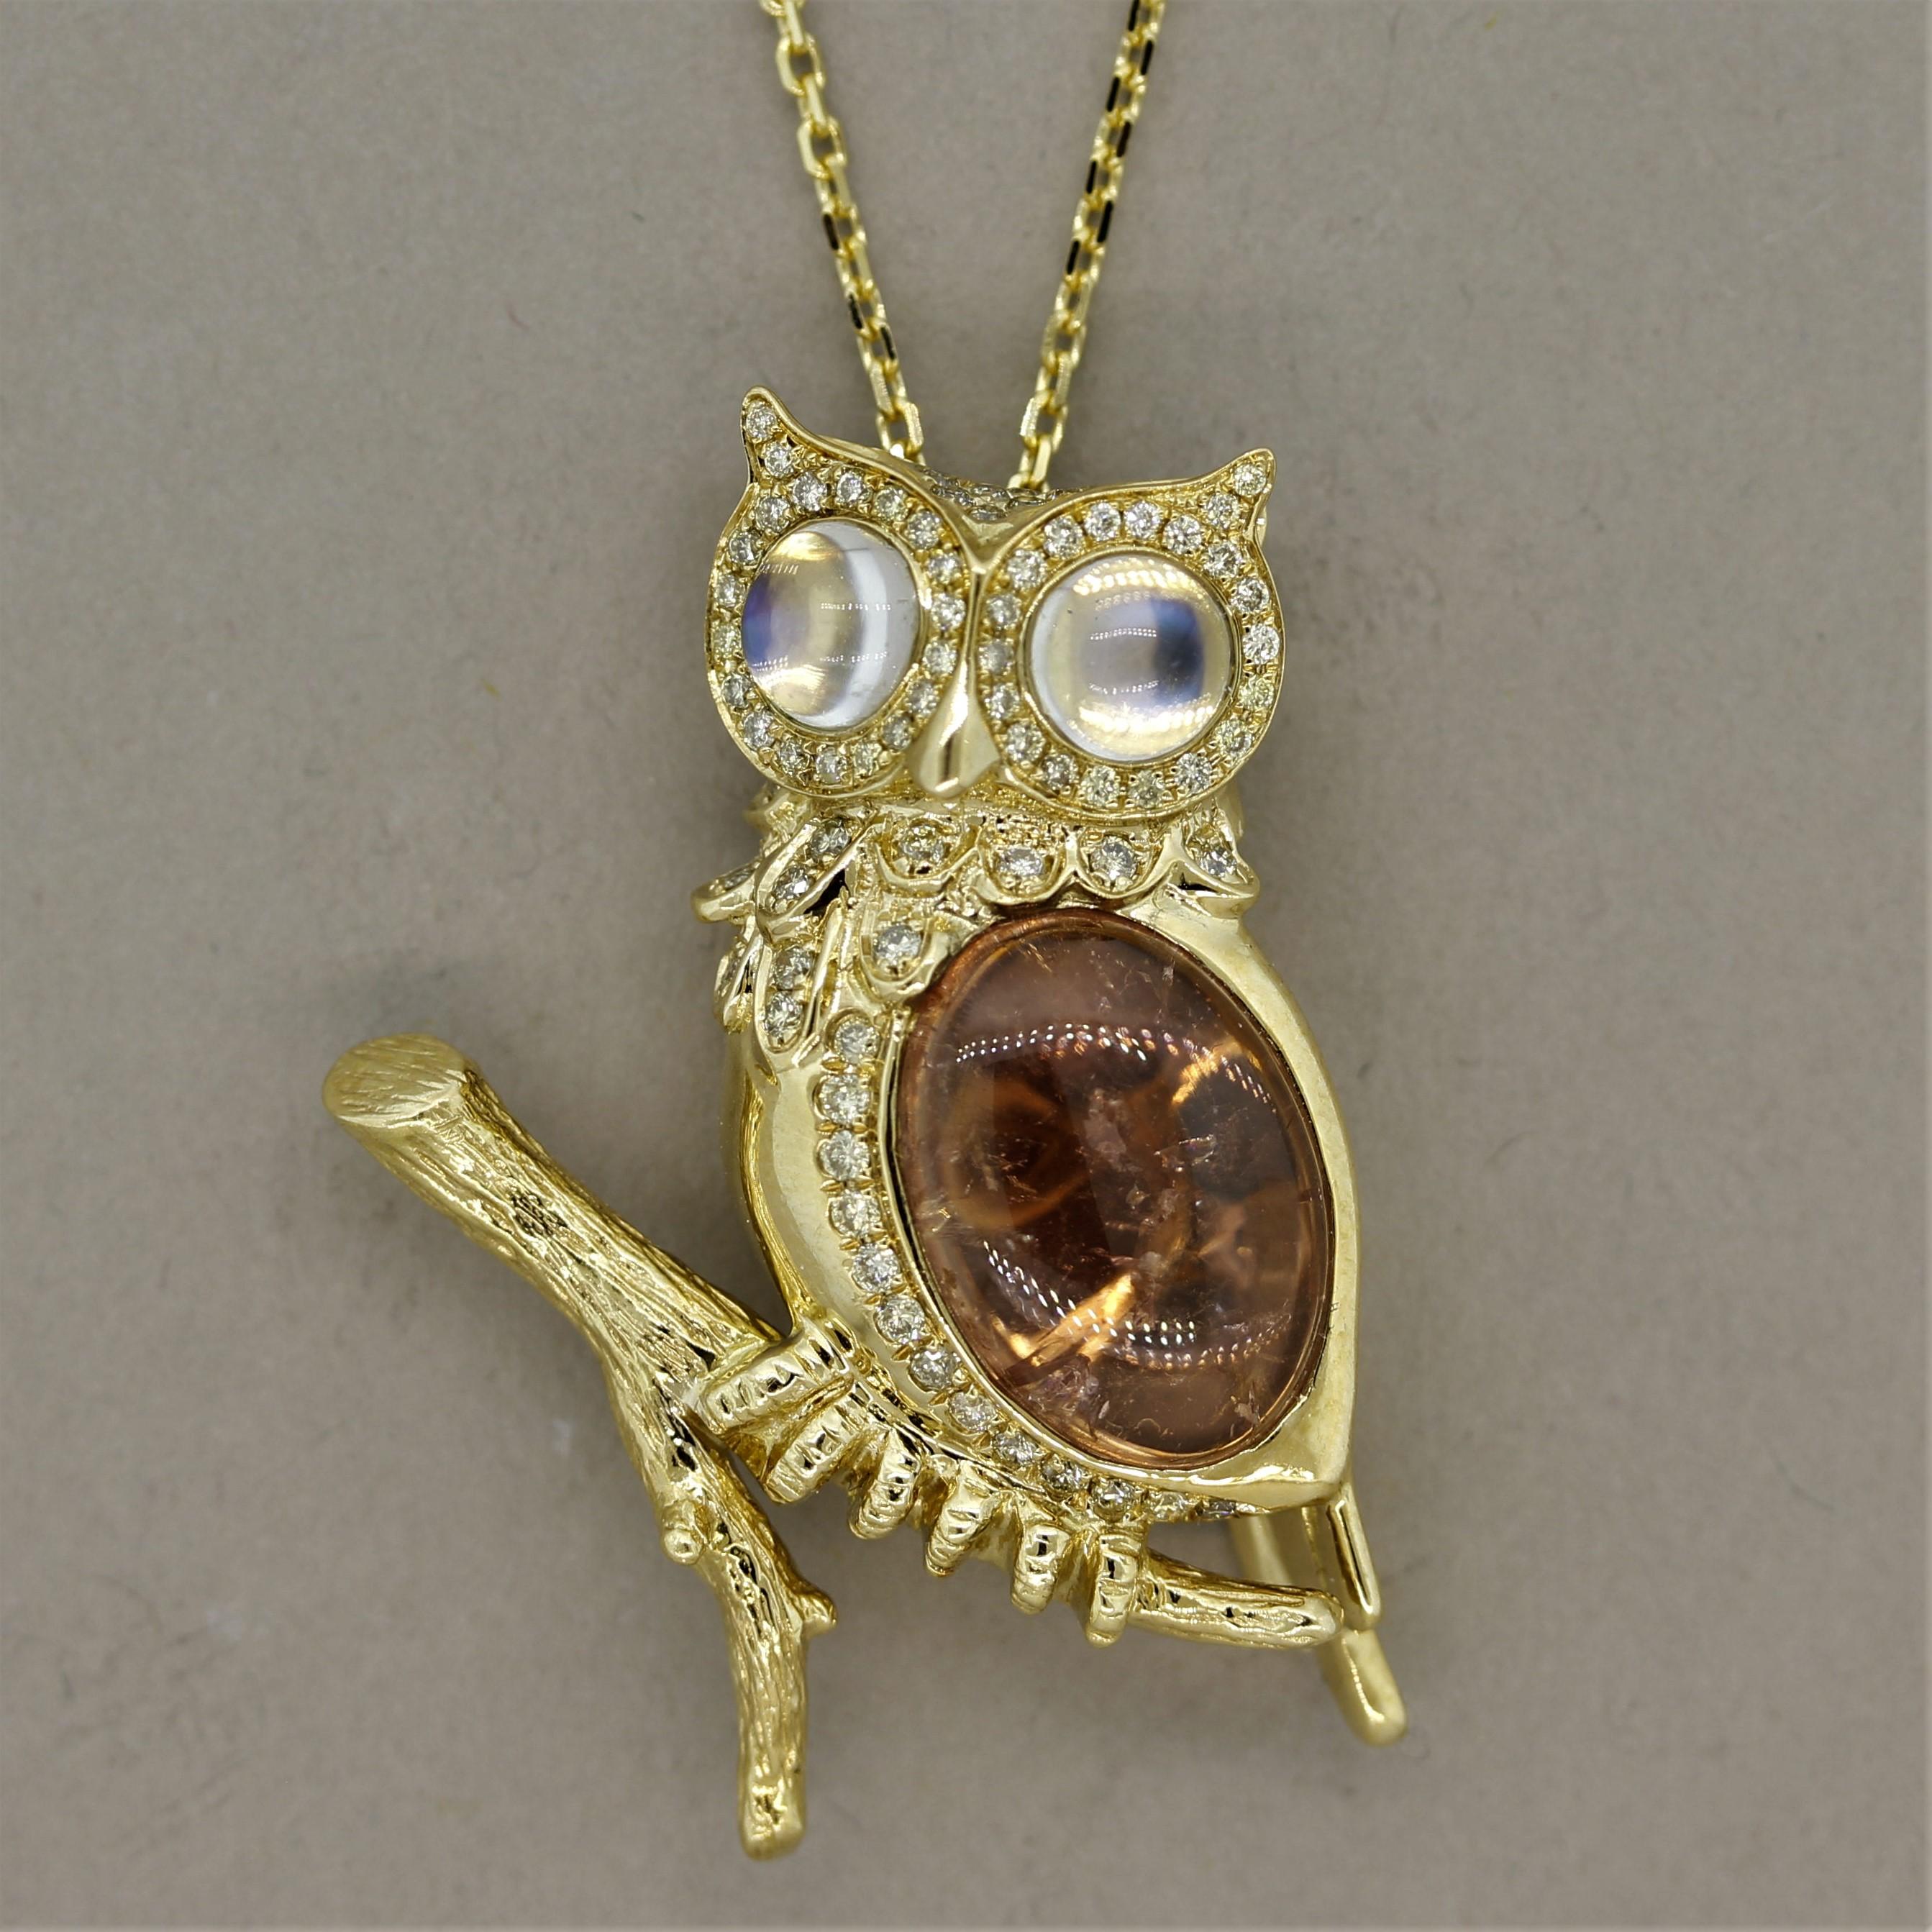 A cute and wise owl! This lovely pendant features a gold owl with 2 moonstone eyes weighing 0.83 carats. As light hits the moonstones a blue adularescence can be seen shining over the gems. The owl's body is made of a luscious 5.61 carat